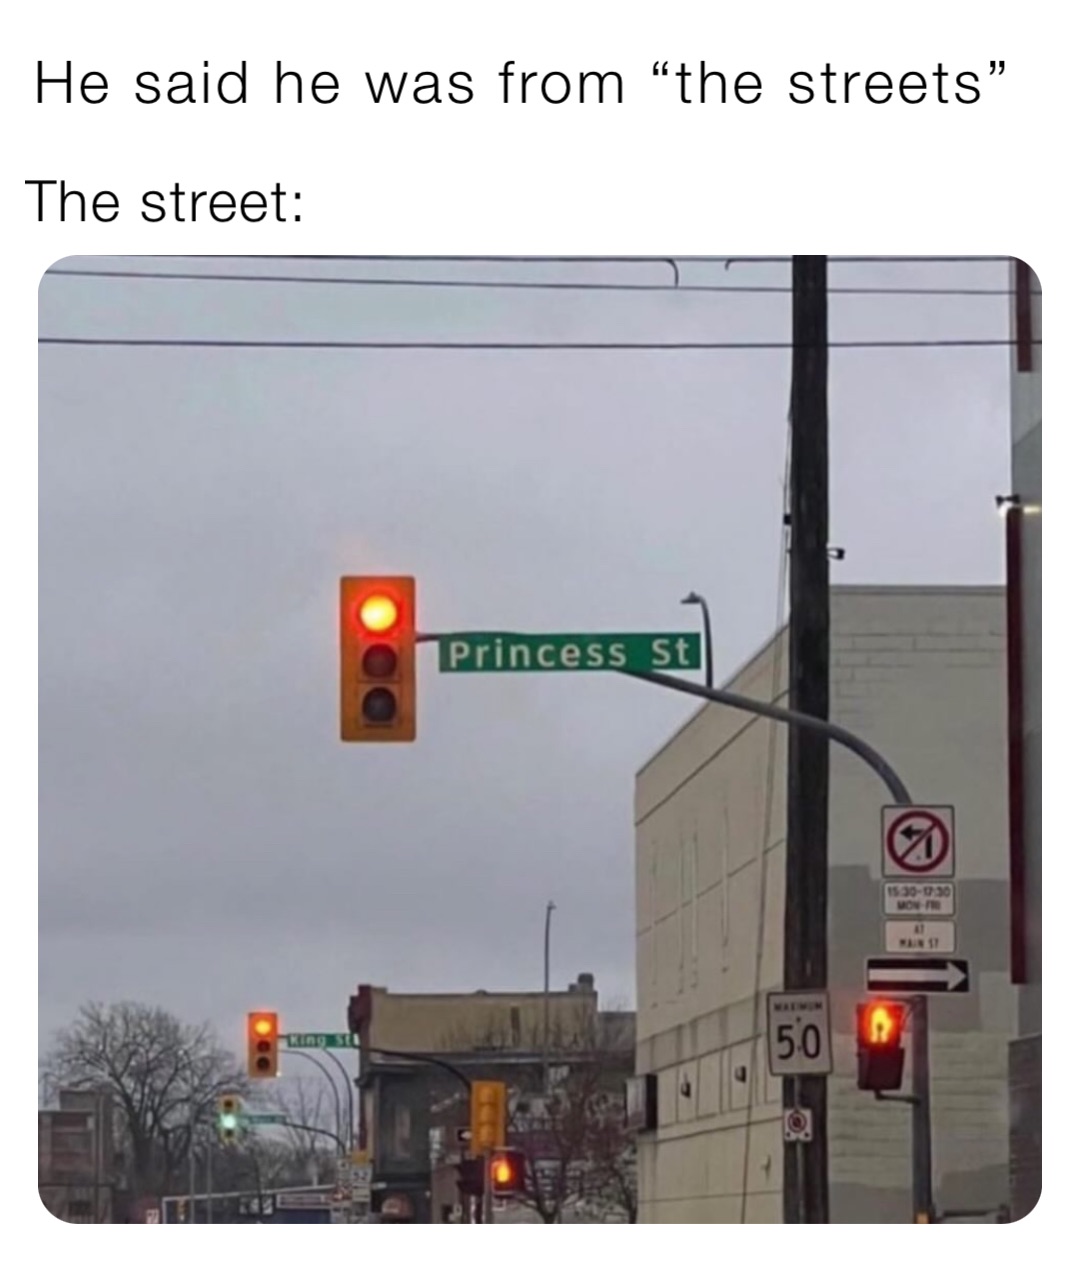 He said he was from “the streets” The street: